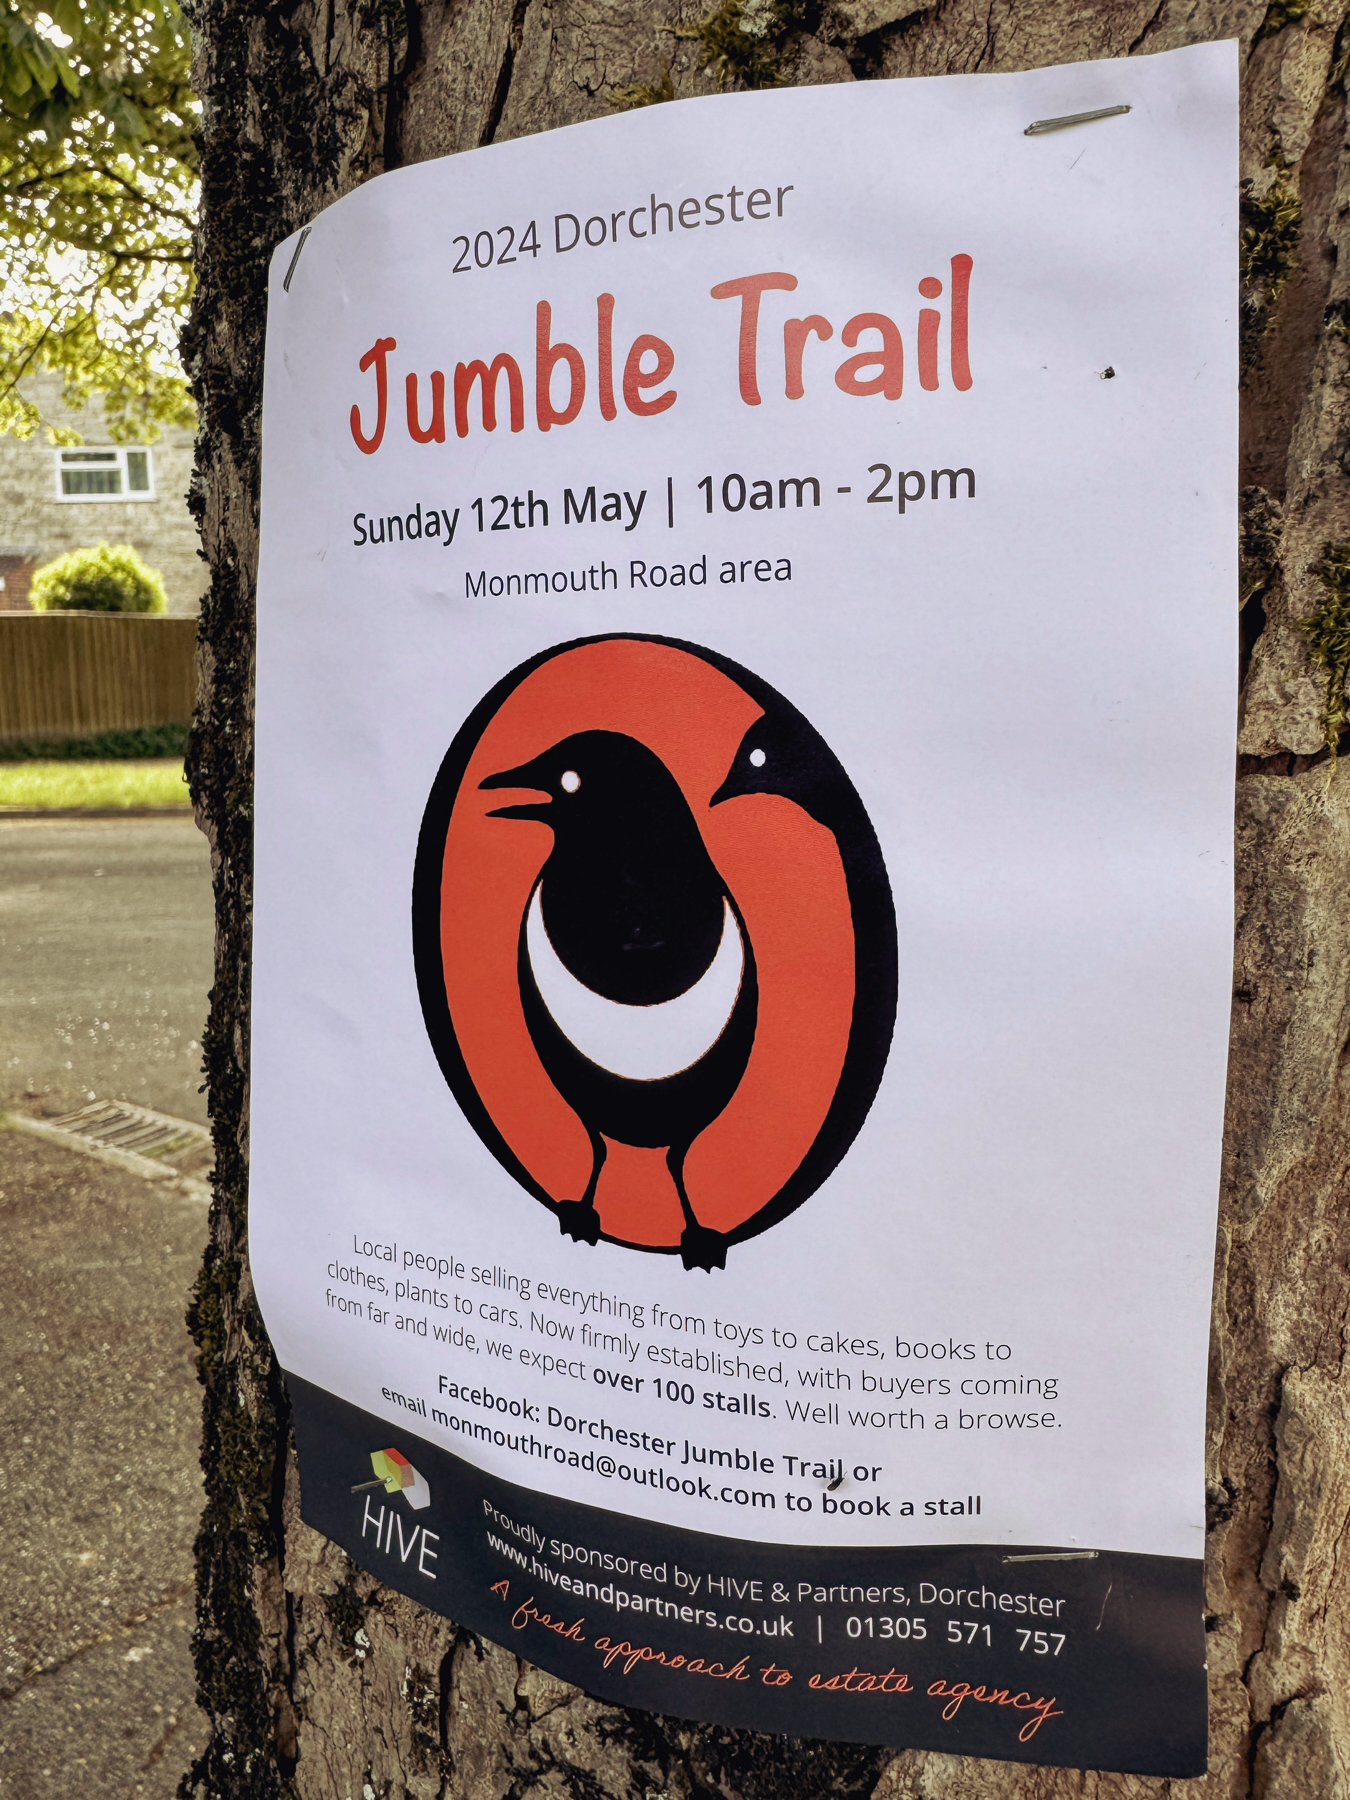 A poster for the jumble train stapled to a tree showing the logo of a magpie against an orange background.